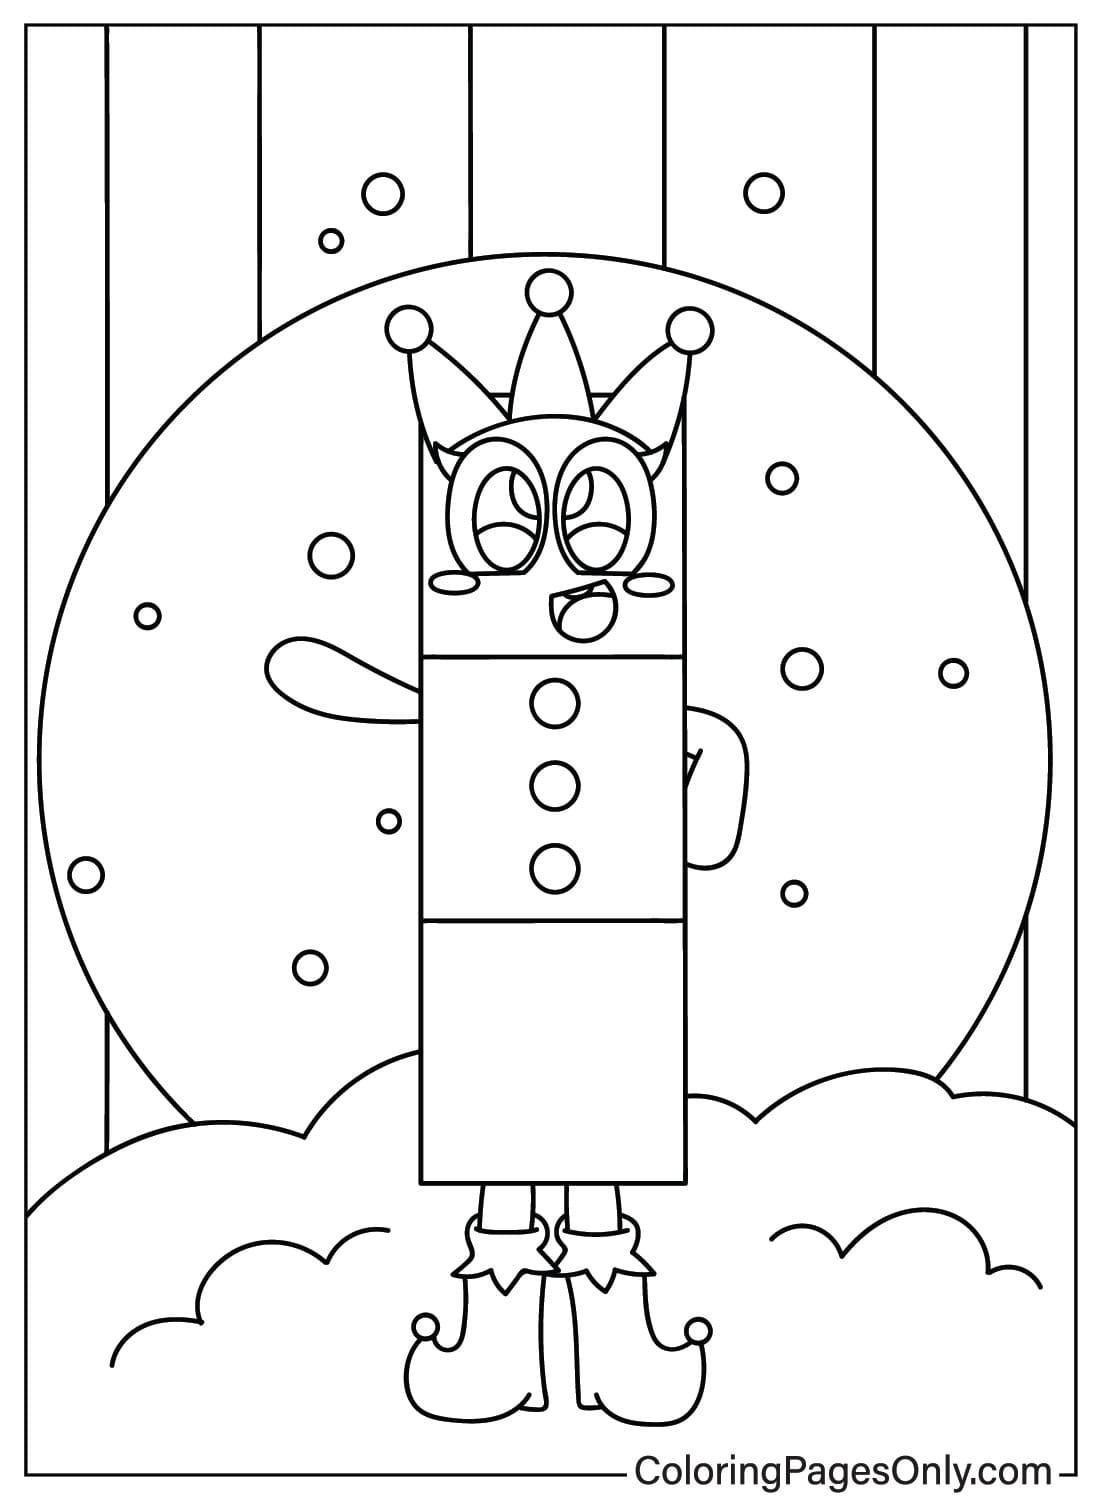 Numberblocks Three Coloring Page to Print Coloring Page